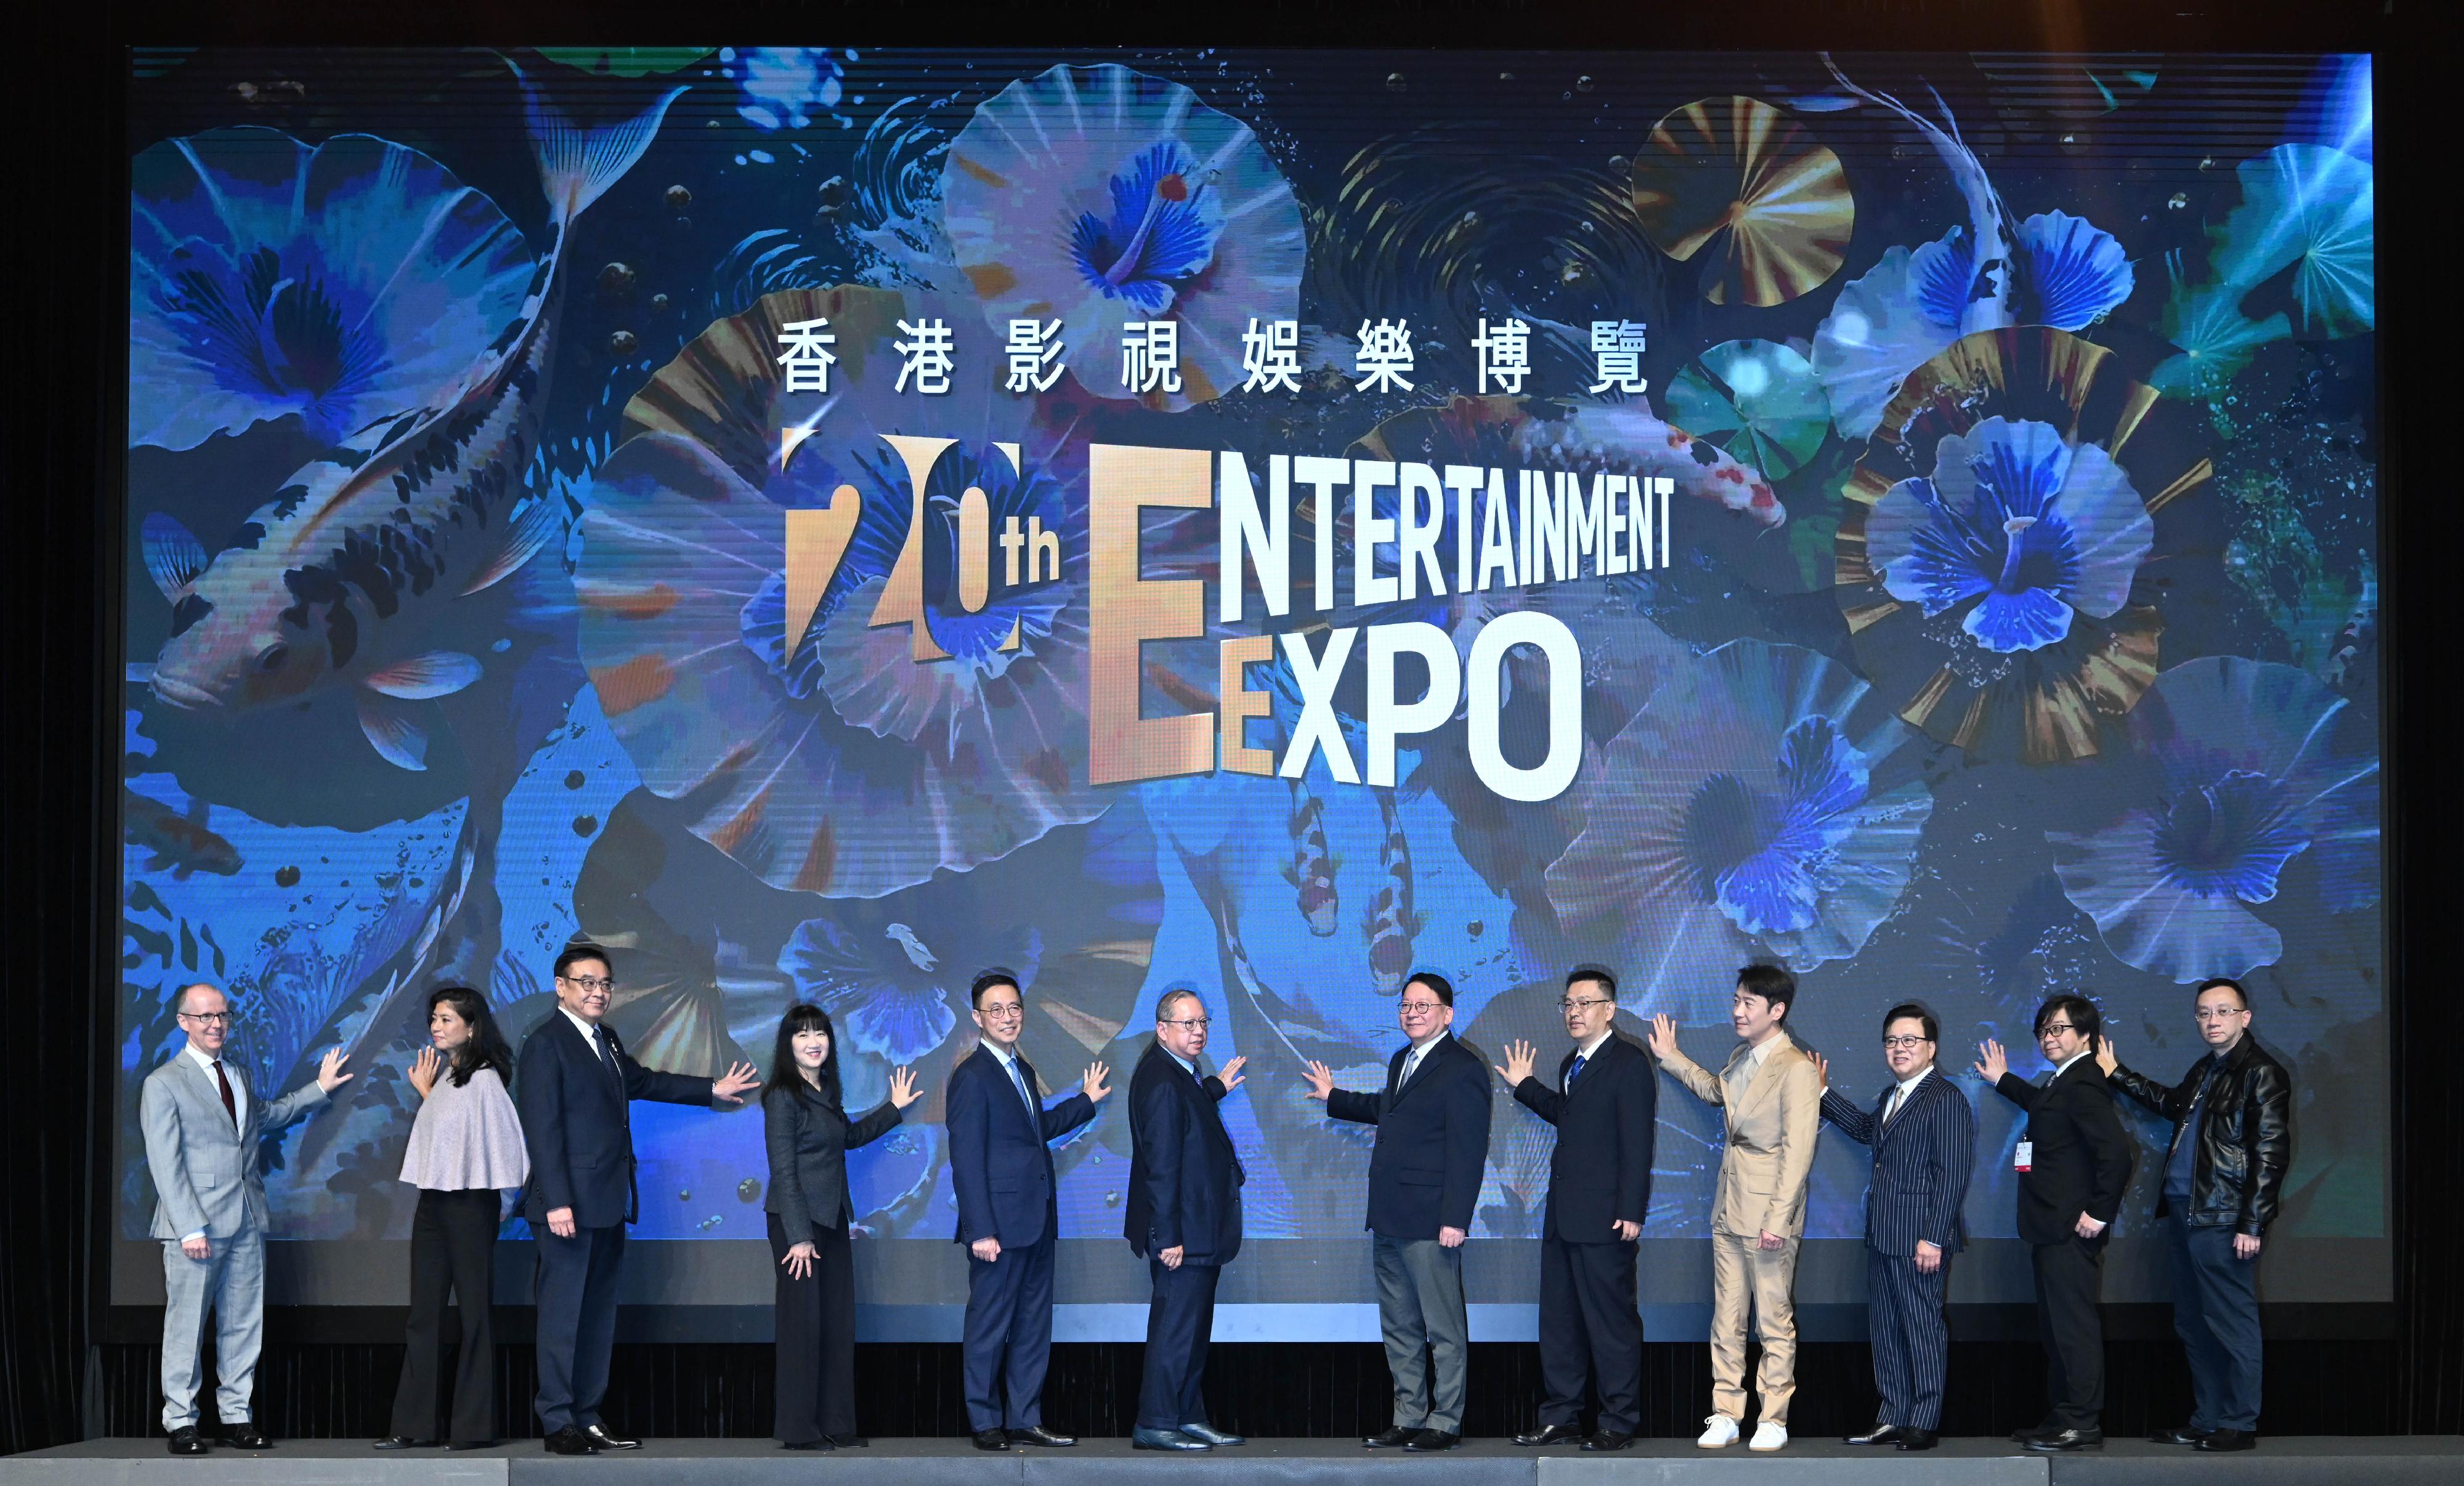 The Chief Secretary for Administration, Mr Chan Kwok-ki, attended the Kick-off Ceremony of Entertainment Expo Hong Kong 2024 today (March 11). Photo shows (from fourth left) the Executive Director of the Hong Kong Trade Development Council (HKTDC), Ms Margaret Fong; the Secretary for Culture, Sports and Tourism, Mr Kevin Yeung; the Chairman of the HKTDC, Dr Peter Lam; Mr Chan; Second-grade Counsel of the Hong Kong, Macao and Taiwan Affairs Office of the National Radio and Television Administration Mr Shi Zhiyan; the Hong Kong Entertainment Ambassador, Leon Lai, and other guests officiating at the kick-off ceremony.

